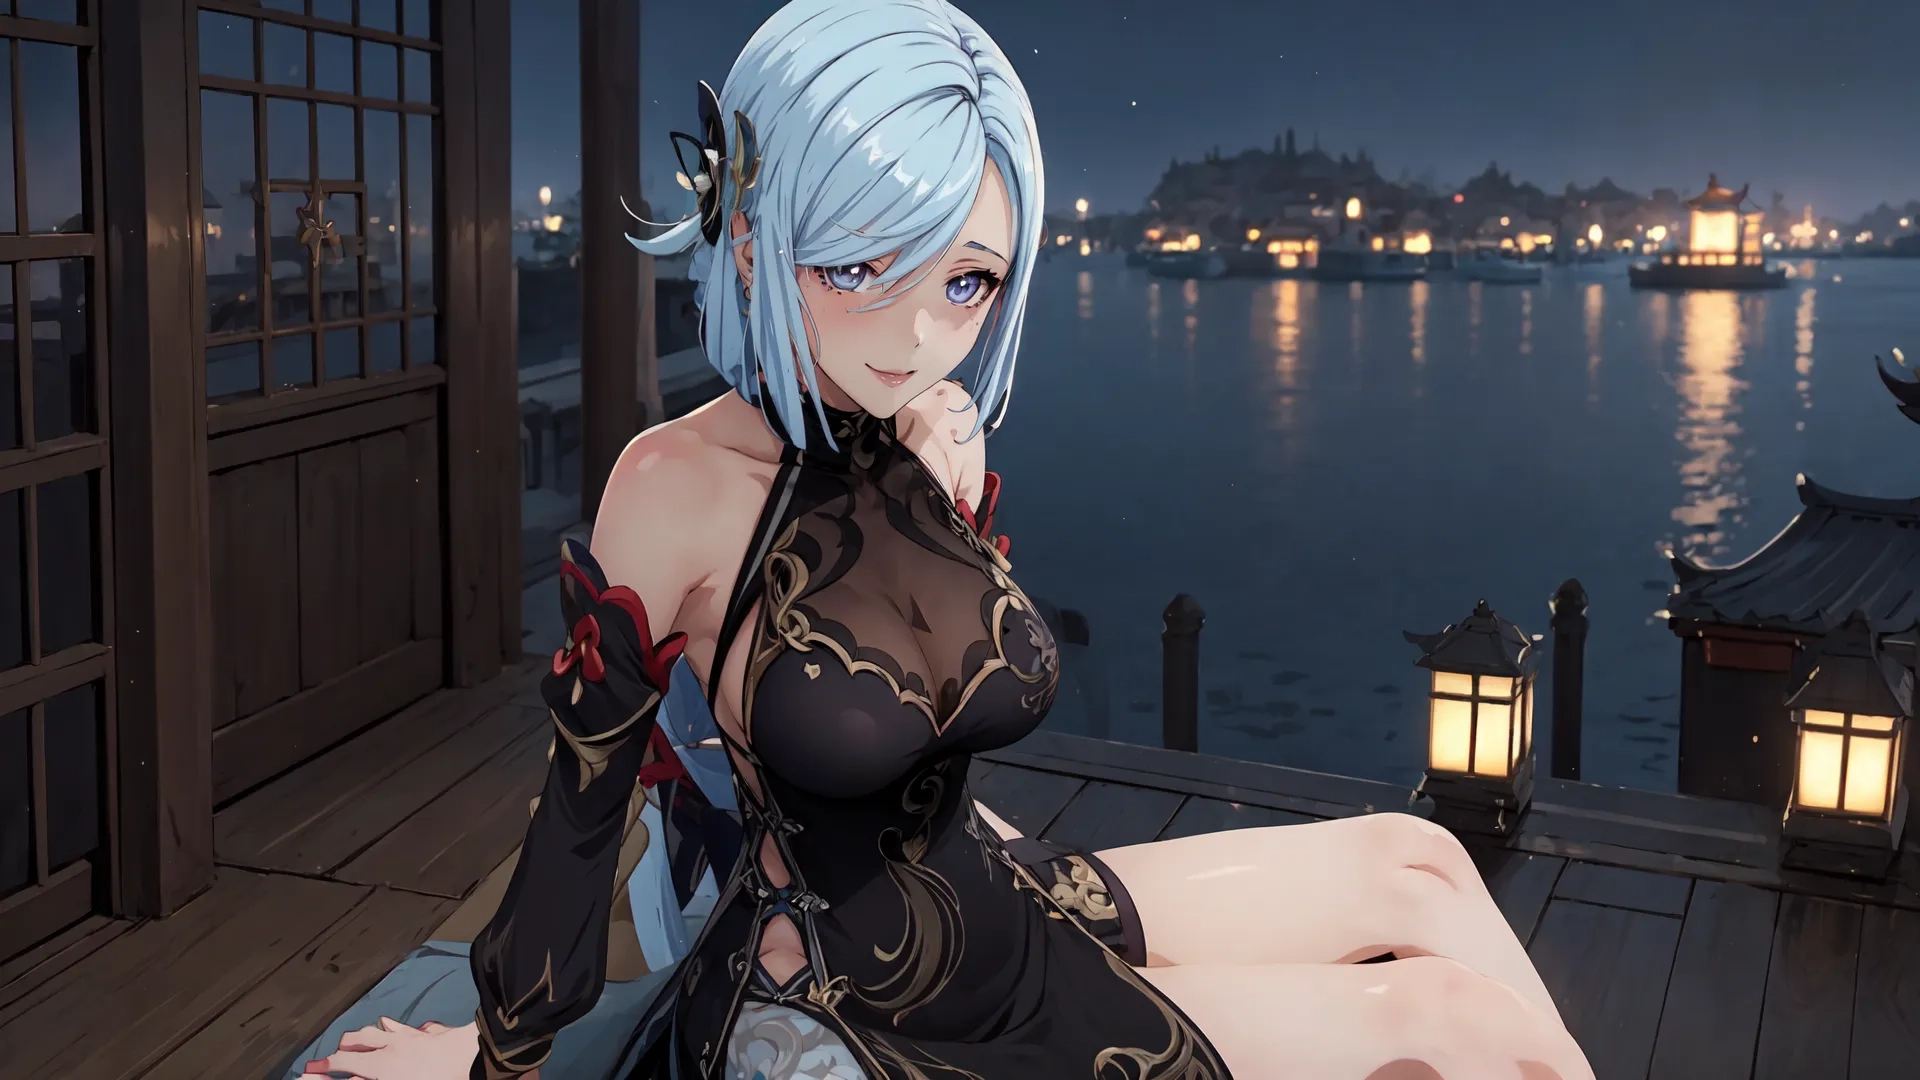 anime like girl sitting on platform with blue hair and boots on, looking into distance near lake at night time by wooden docks with lanterns and city
